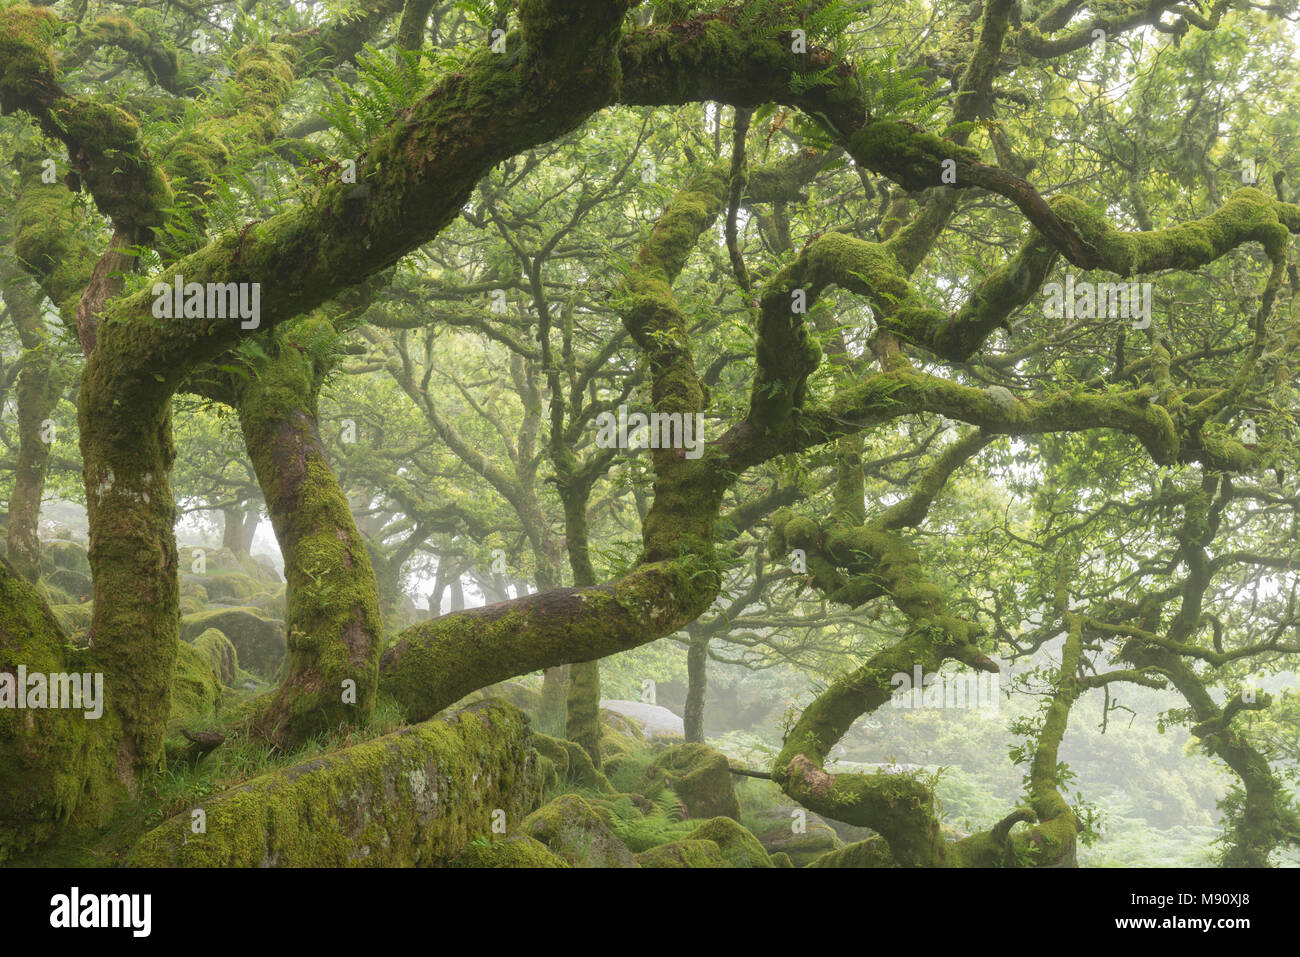 Gnarled and twisted moss covered oak trees in Wistman’s Wood SSSI, Dartmoor National Park, Devon, England. Summer (July) 2017. Stock Photo